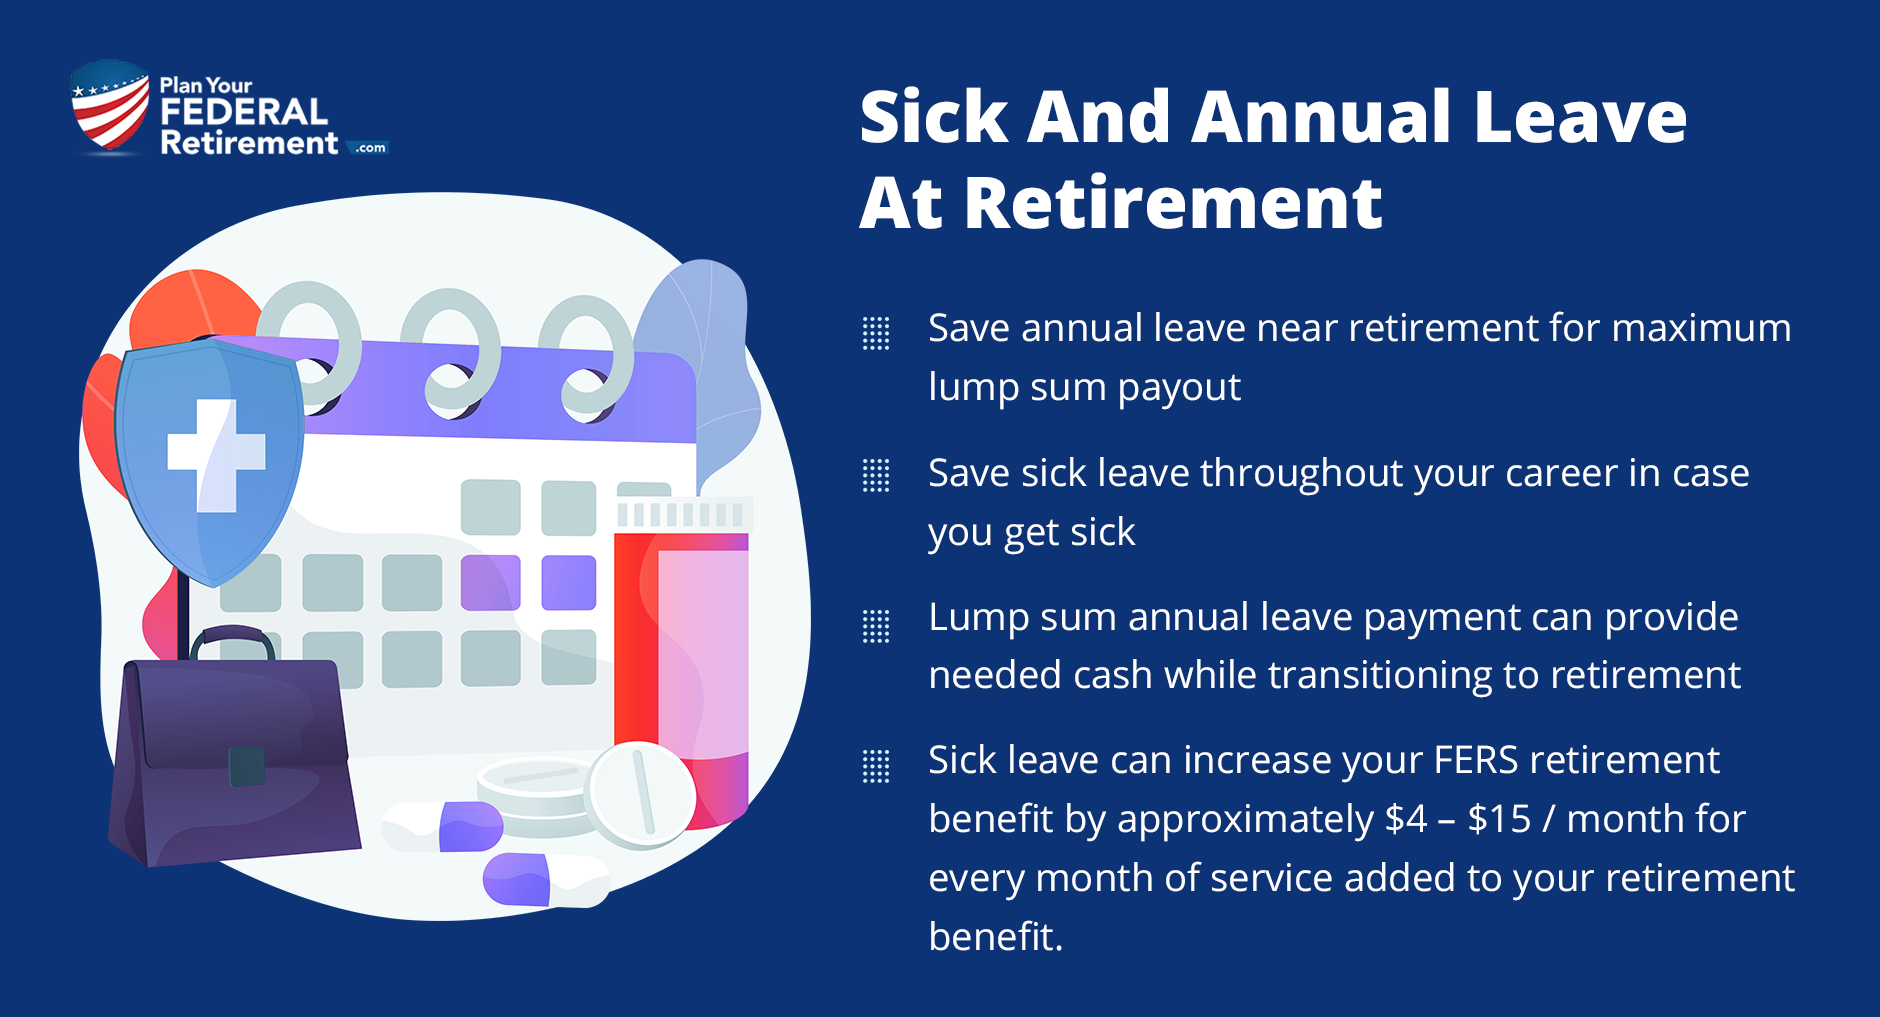 sick-and-annual-leave-at-retirement-plan-your-federal-retirement